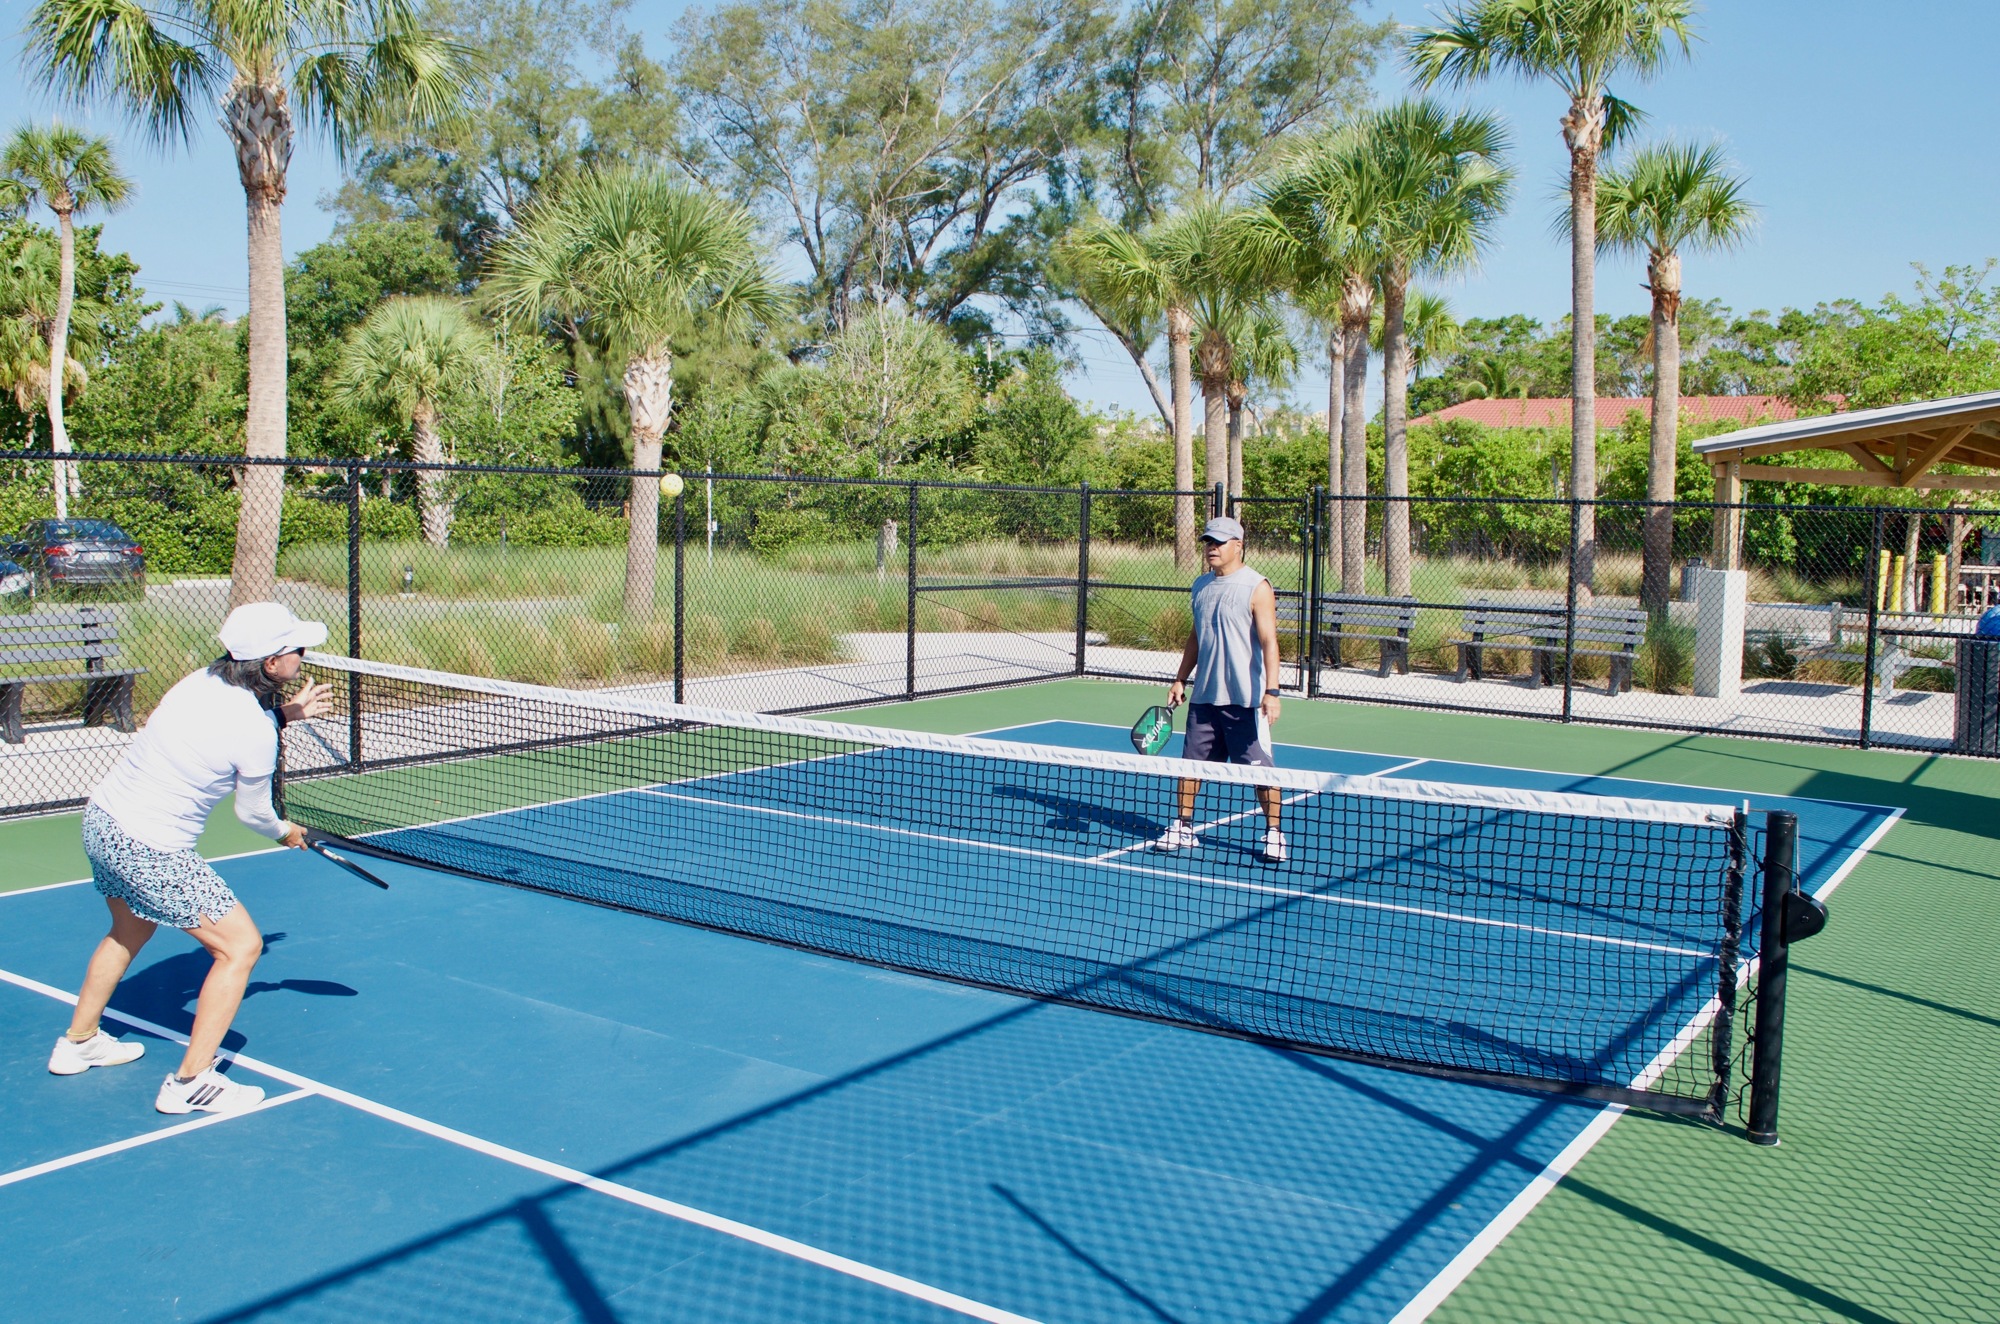 Pickleball is played on a badminton-sized court that measures 44 feet by 20 feet. Players use paddles to hit the hollow, plastic balls.